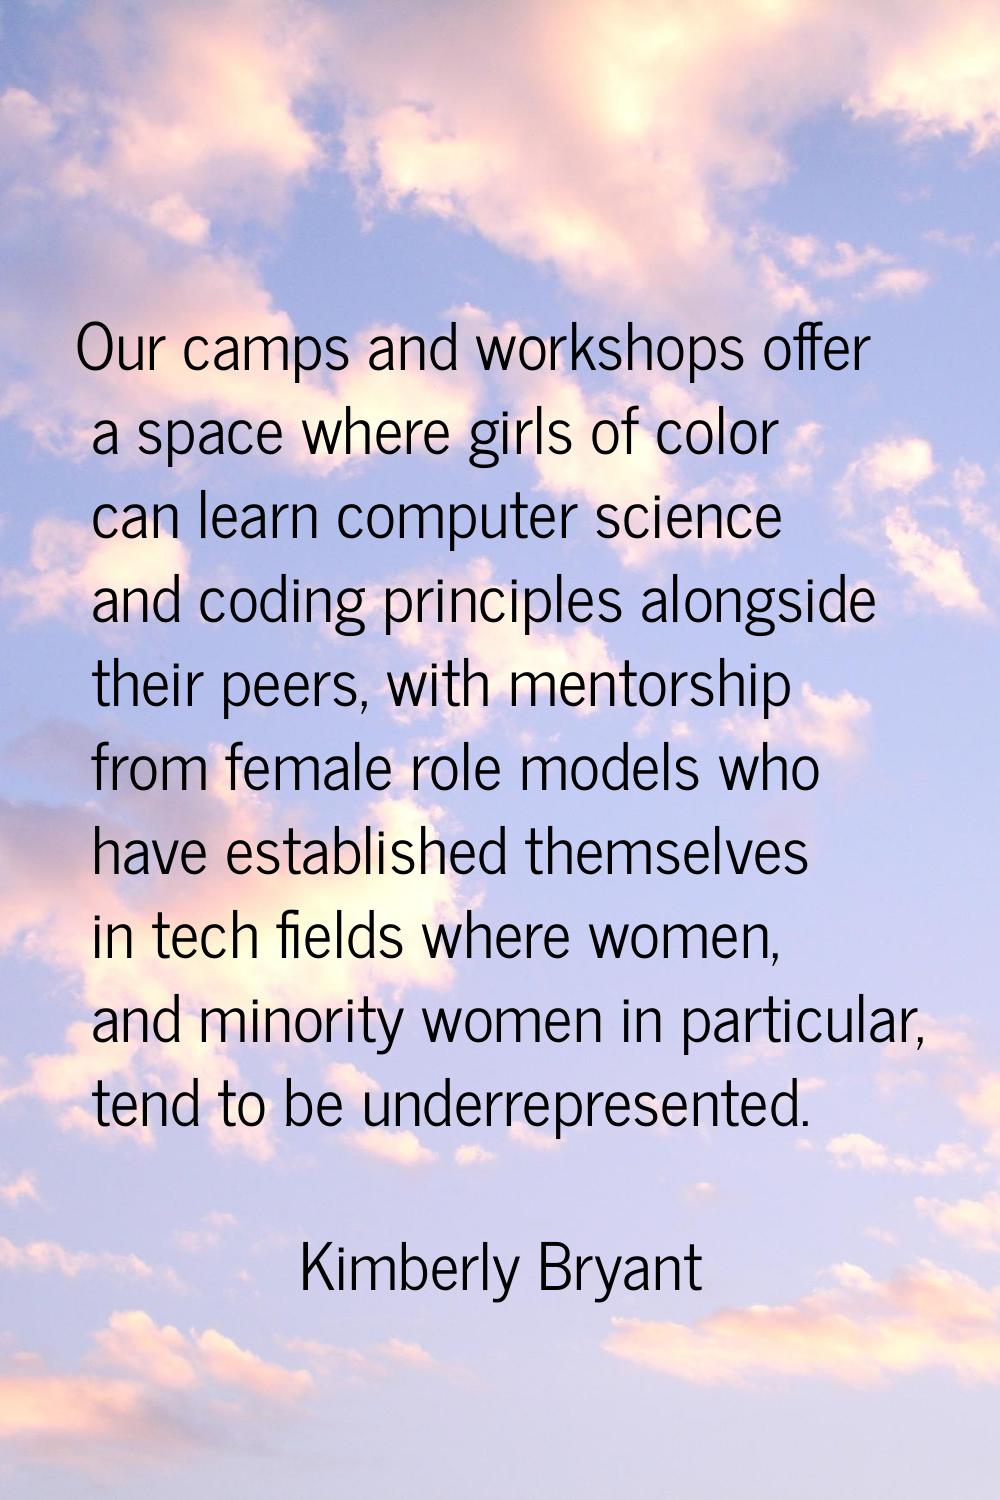 Our camps and workshops offer a space where girls of color can learn computer science and coding pr